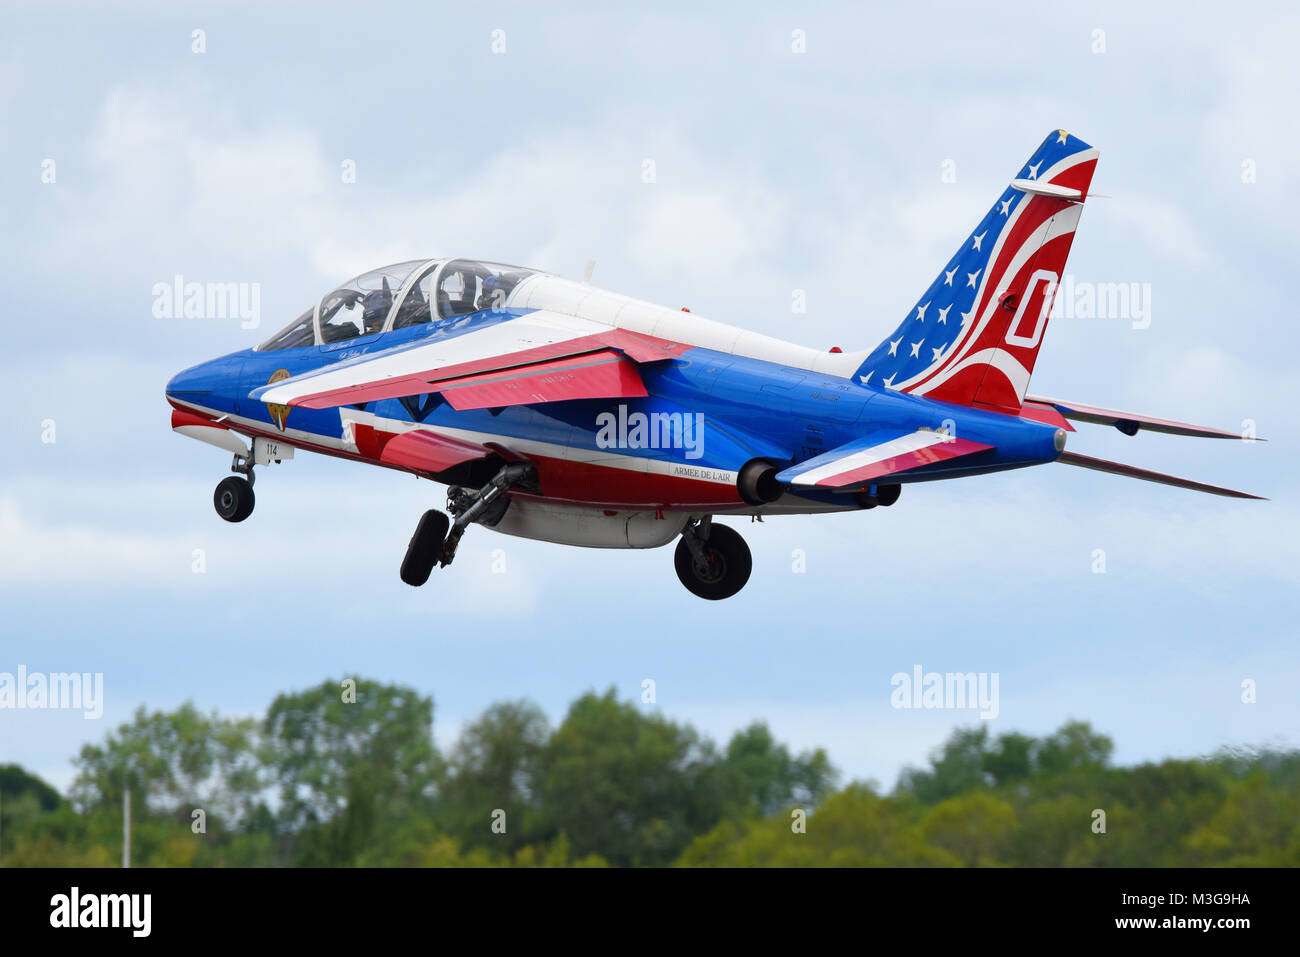 Dassault Alpha Jet of the French Air Force Patrouille de France taking off at an airshow Stock Photo